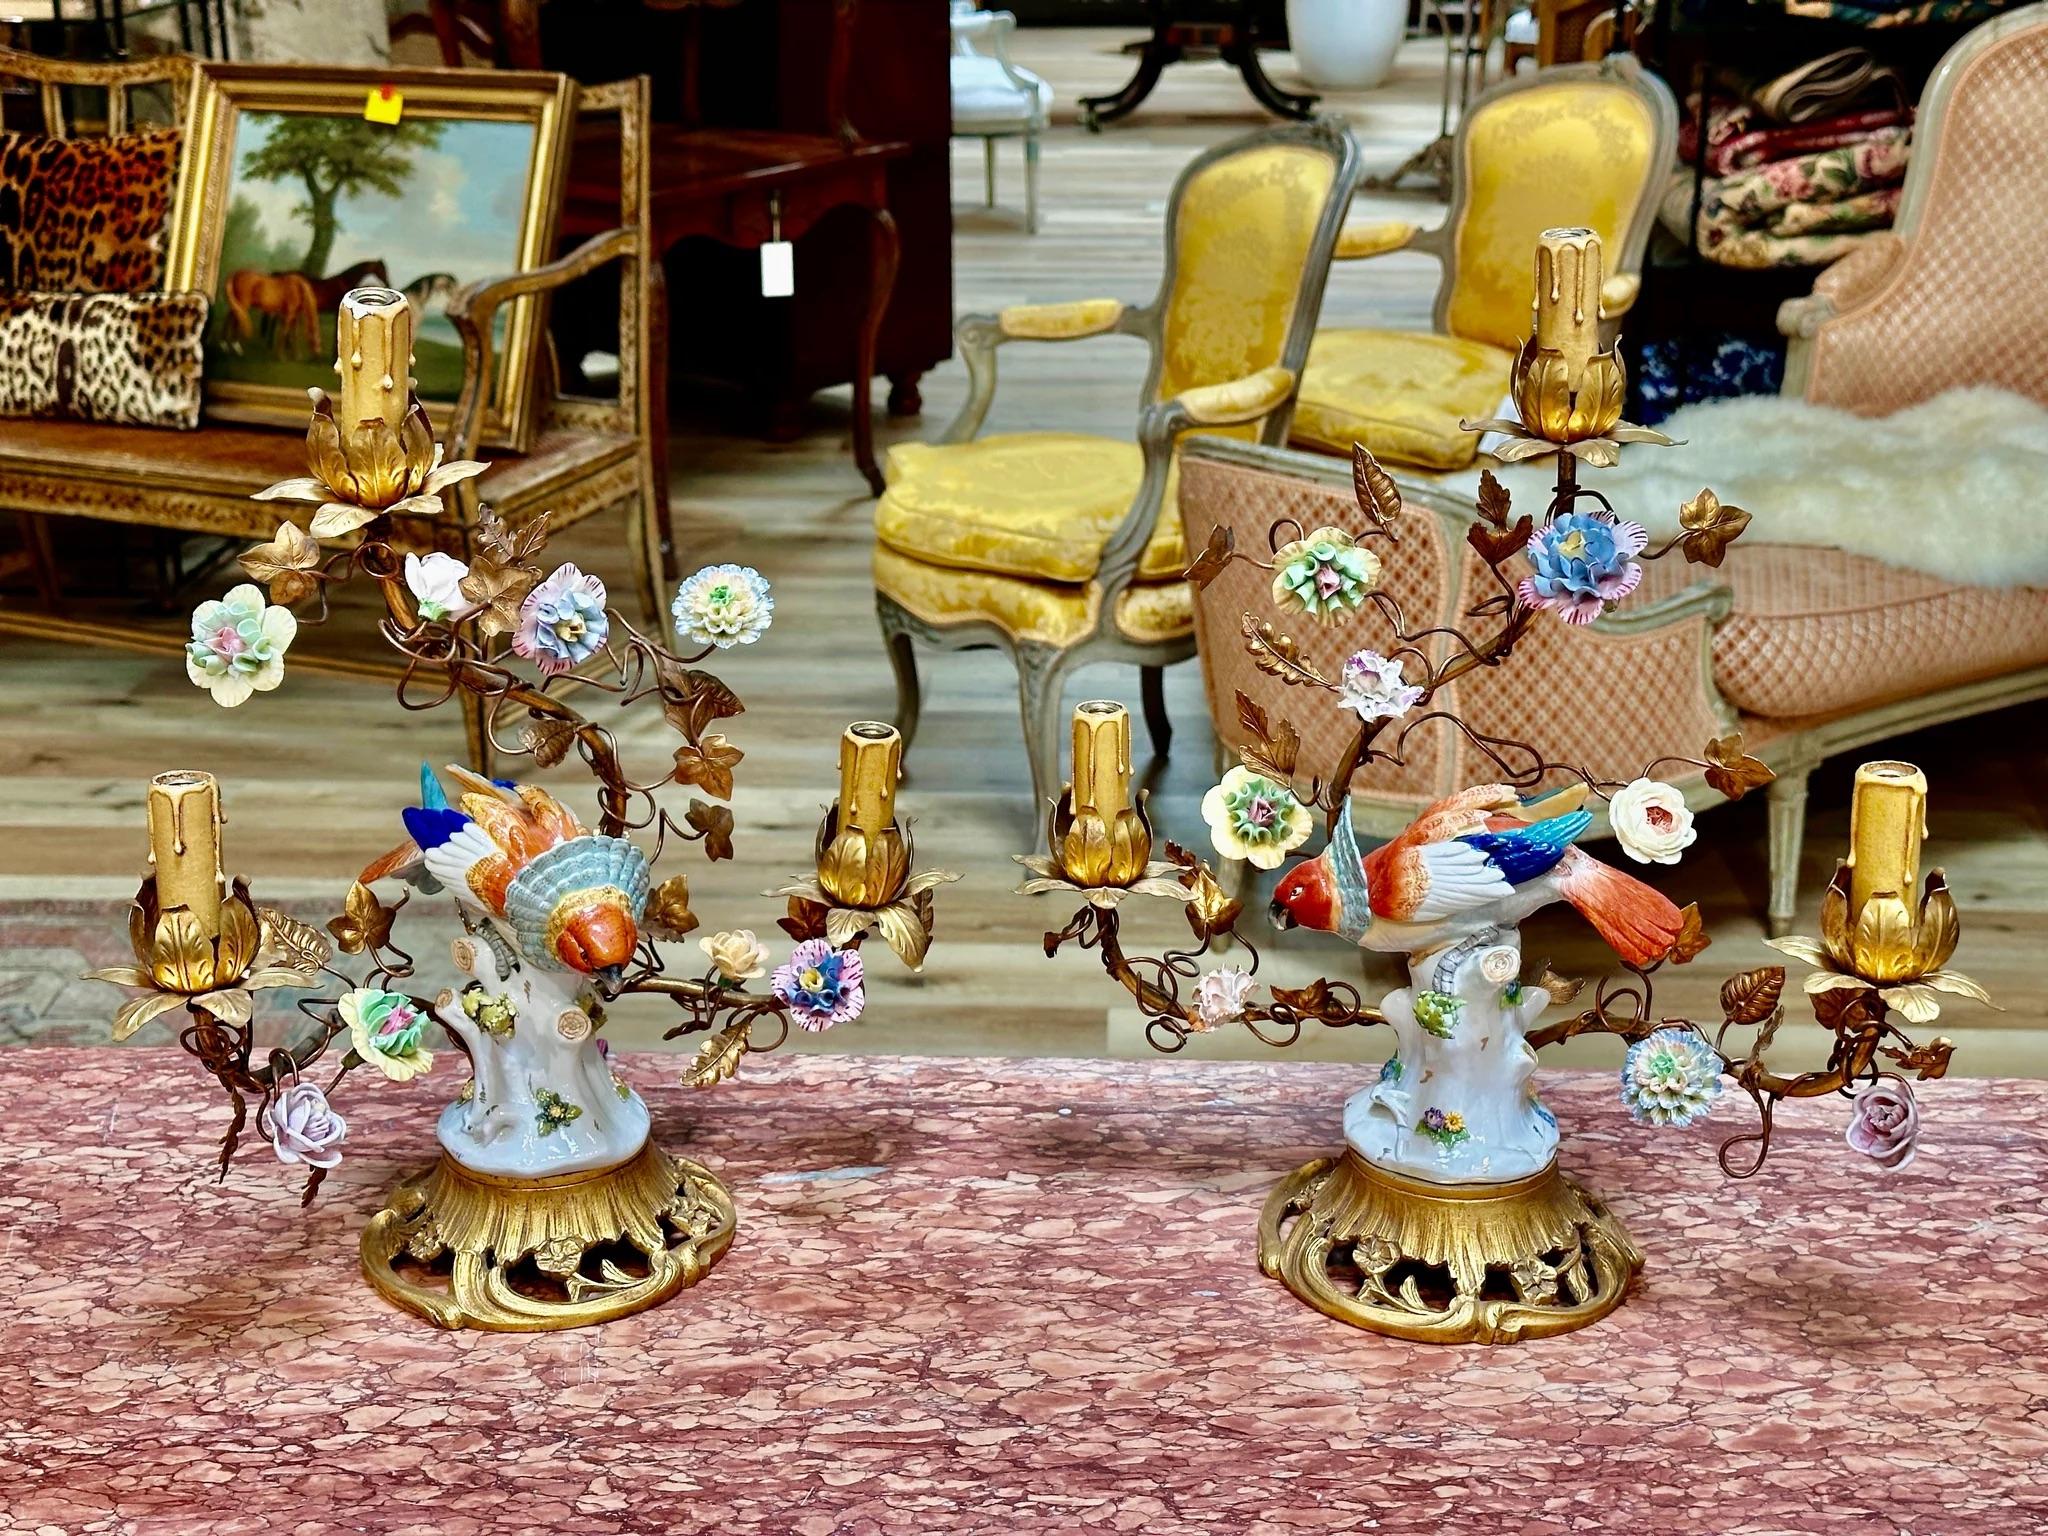 Pair of Volkstedt porcelain fan head parrots mounted on French gilt table lamps, Foliate gilt metal three-branch table lamps with applied floral porcelain sprays..  17.5”  h. x 16” w. x 6” d. ).  Wiring newly restored   Volkstedt mark to macaws, c.